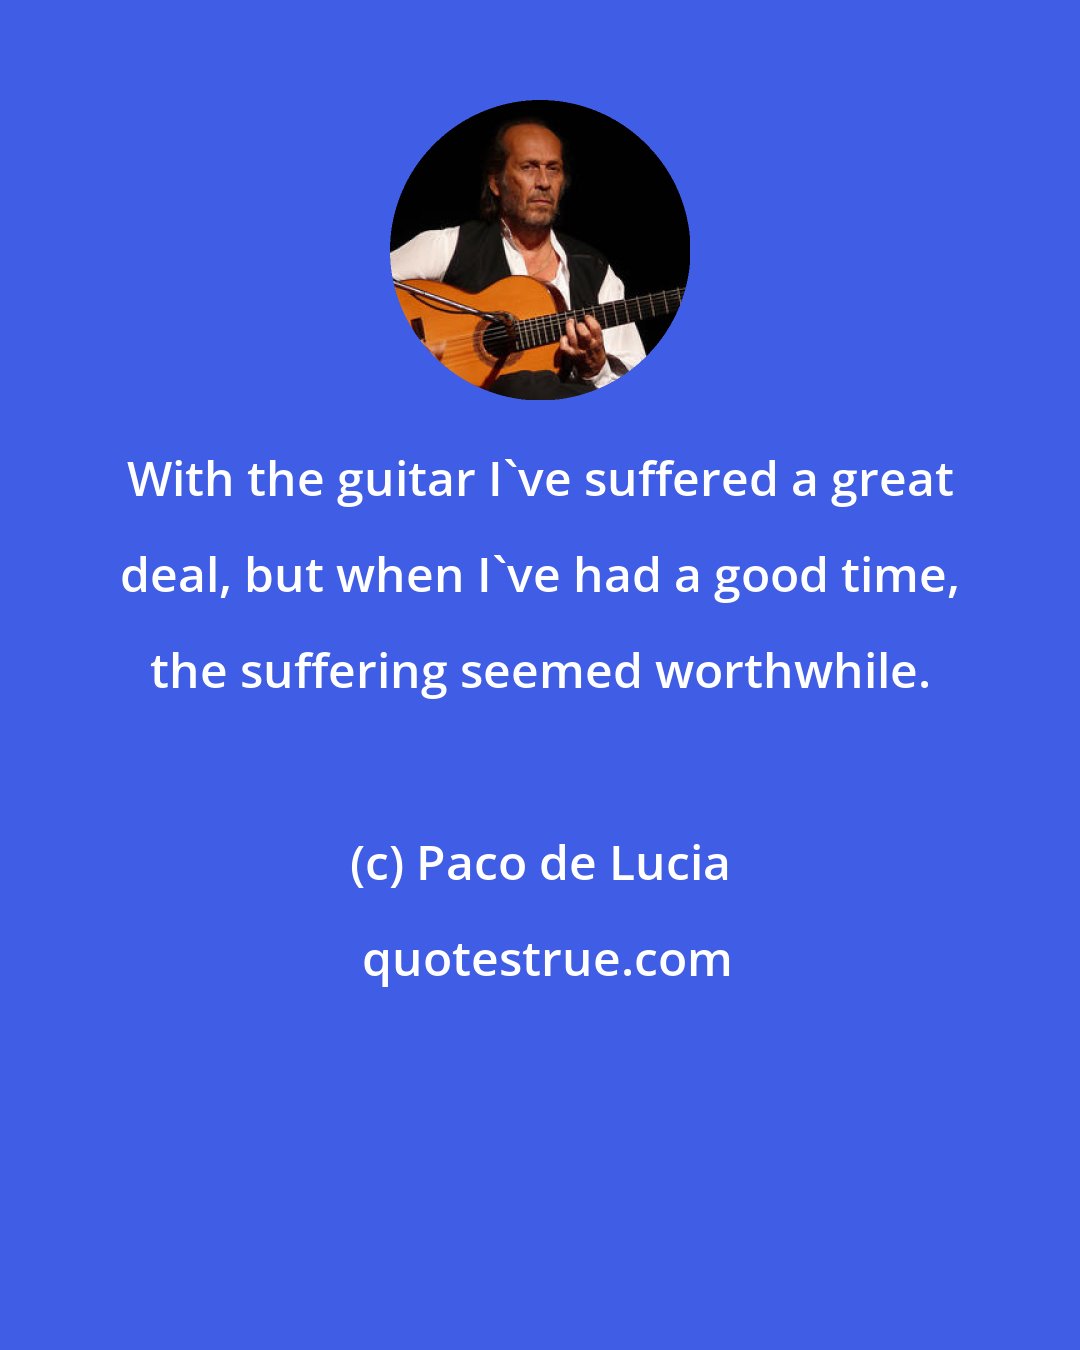 Paco de Lucia: With the guitar I've suffered a great deal, but when I've had a good time, the suffering seemed worthwhile.